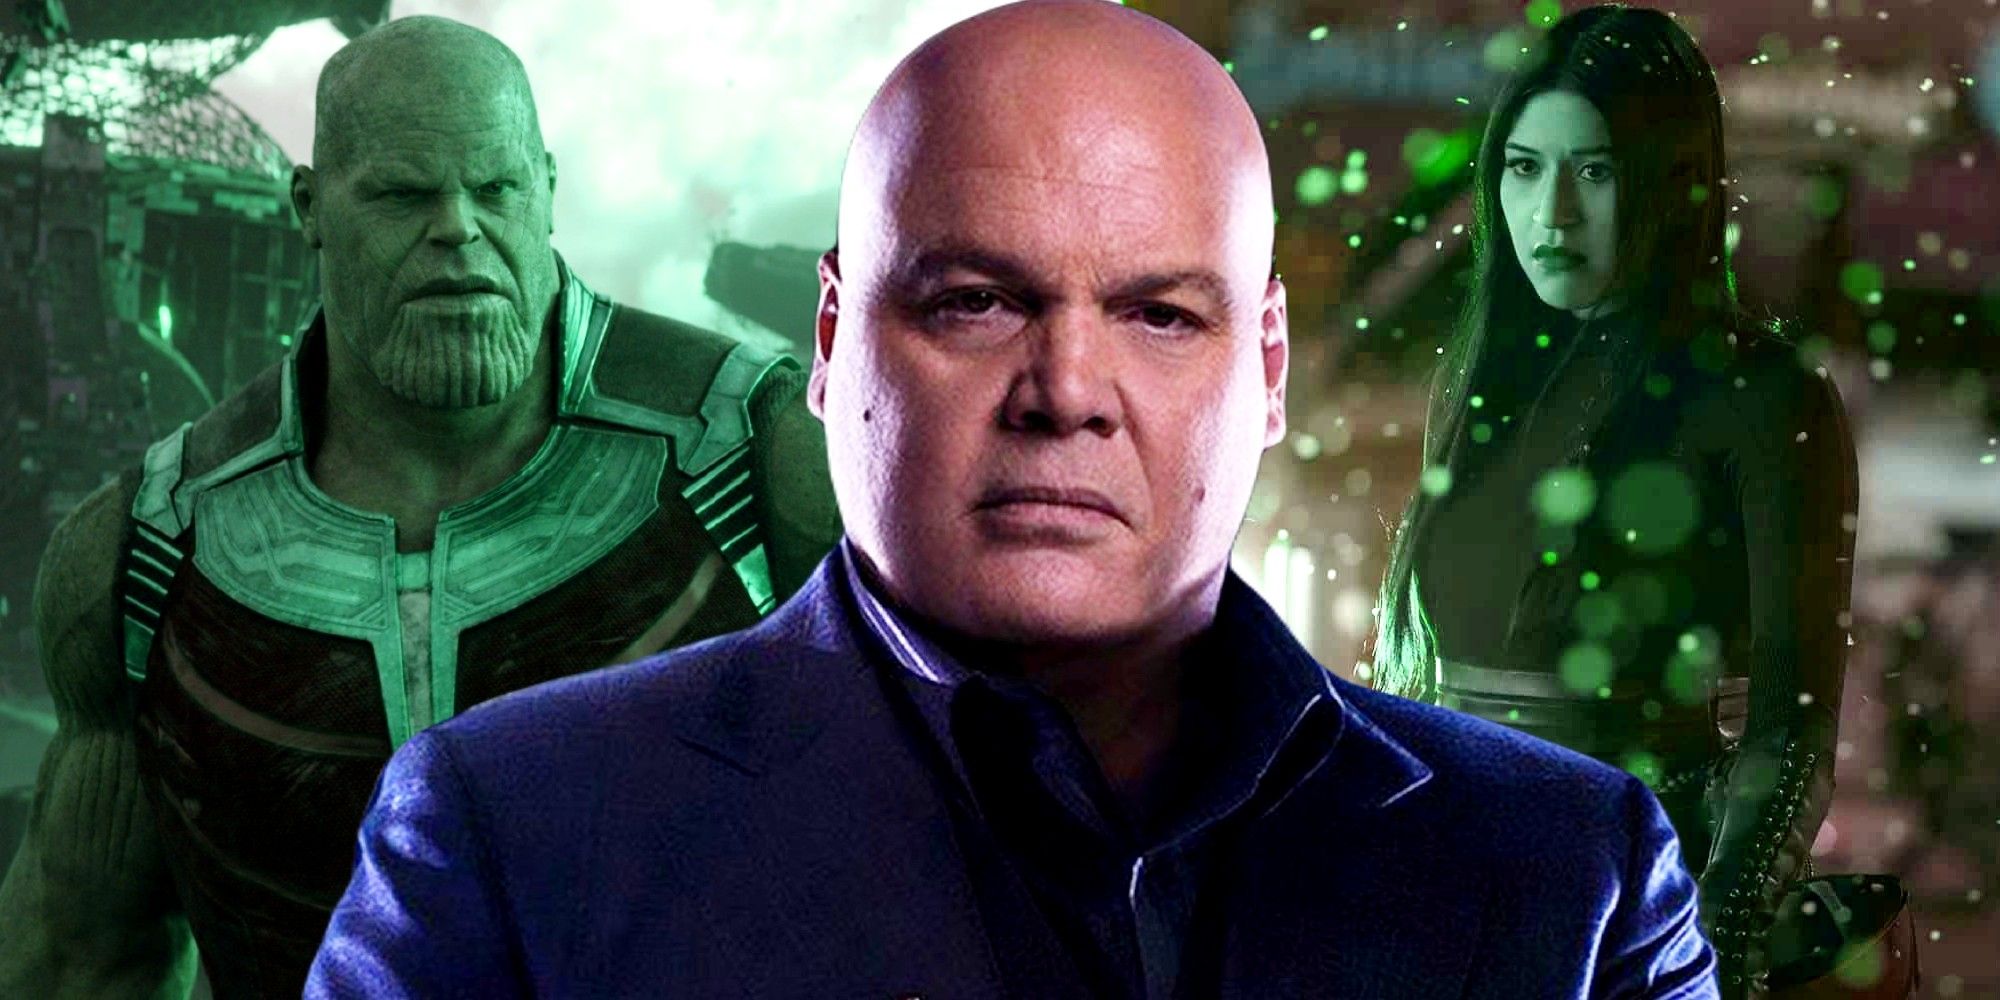 kingpin echo Gamora thanos theory, blended image with vincent d'onofrio's Kingpin, josh brolin's thanos, and Alaqua Cox's Echo